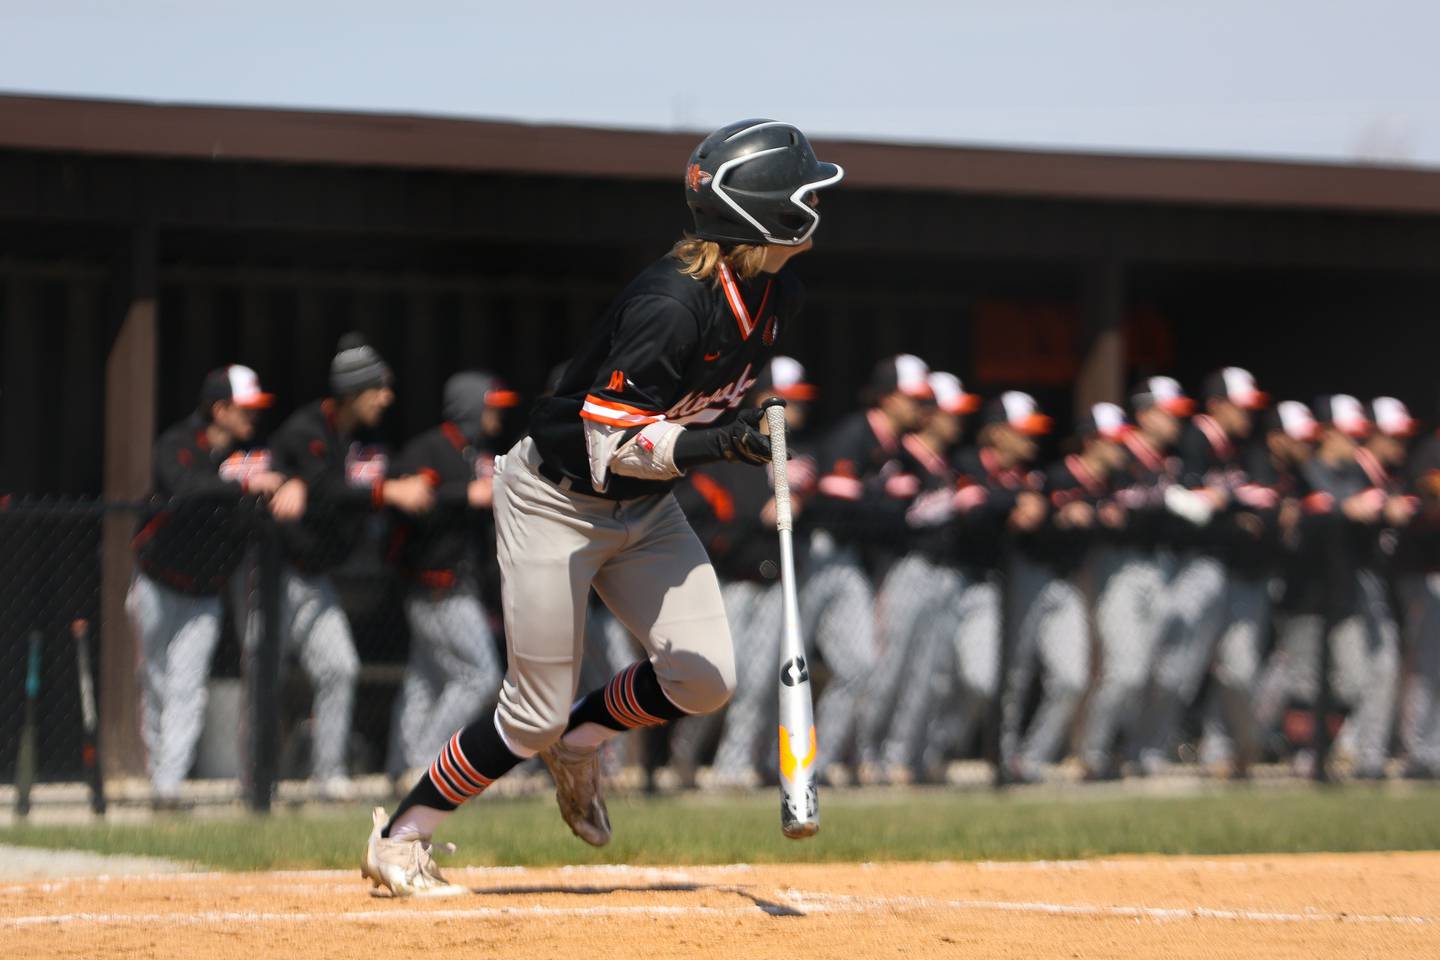 Minooka’s Mitch Thomas doubles against Lincoln-Way West. Friday, April 15, 2022, in New Lenox.